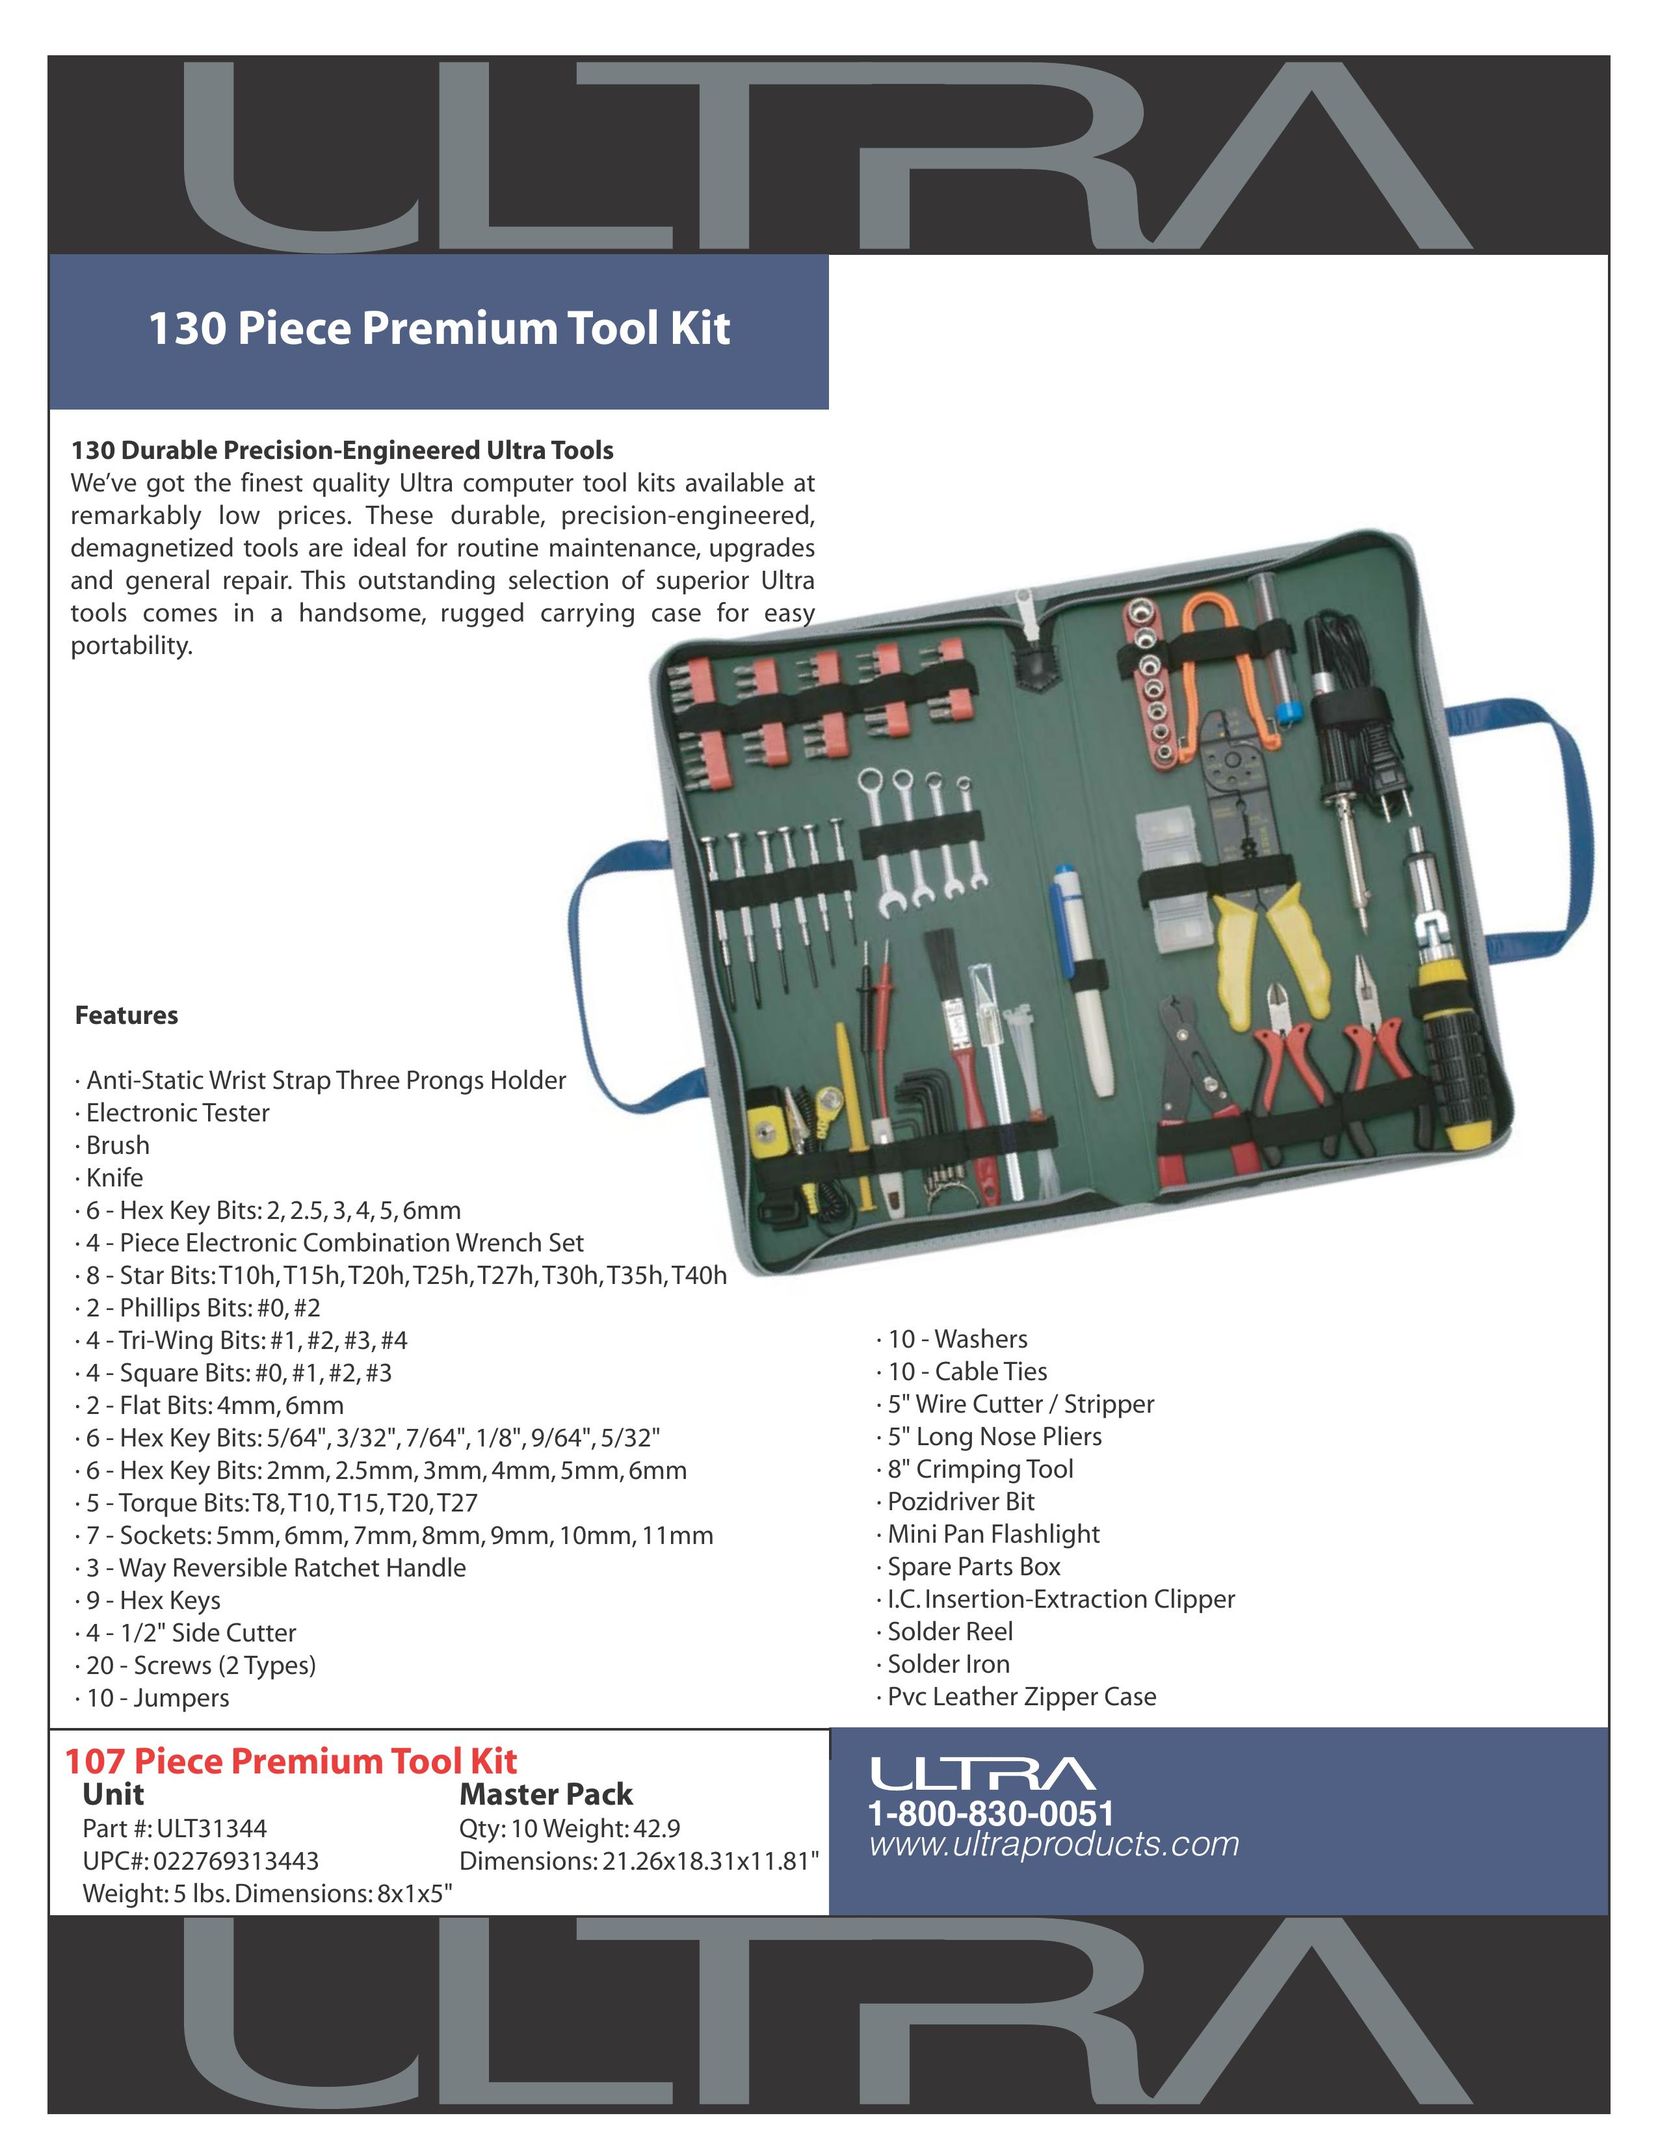 Ultra Products ULT31344 Network Card User Manual